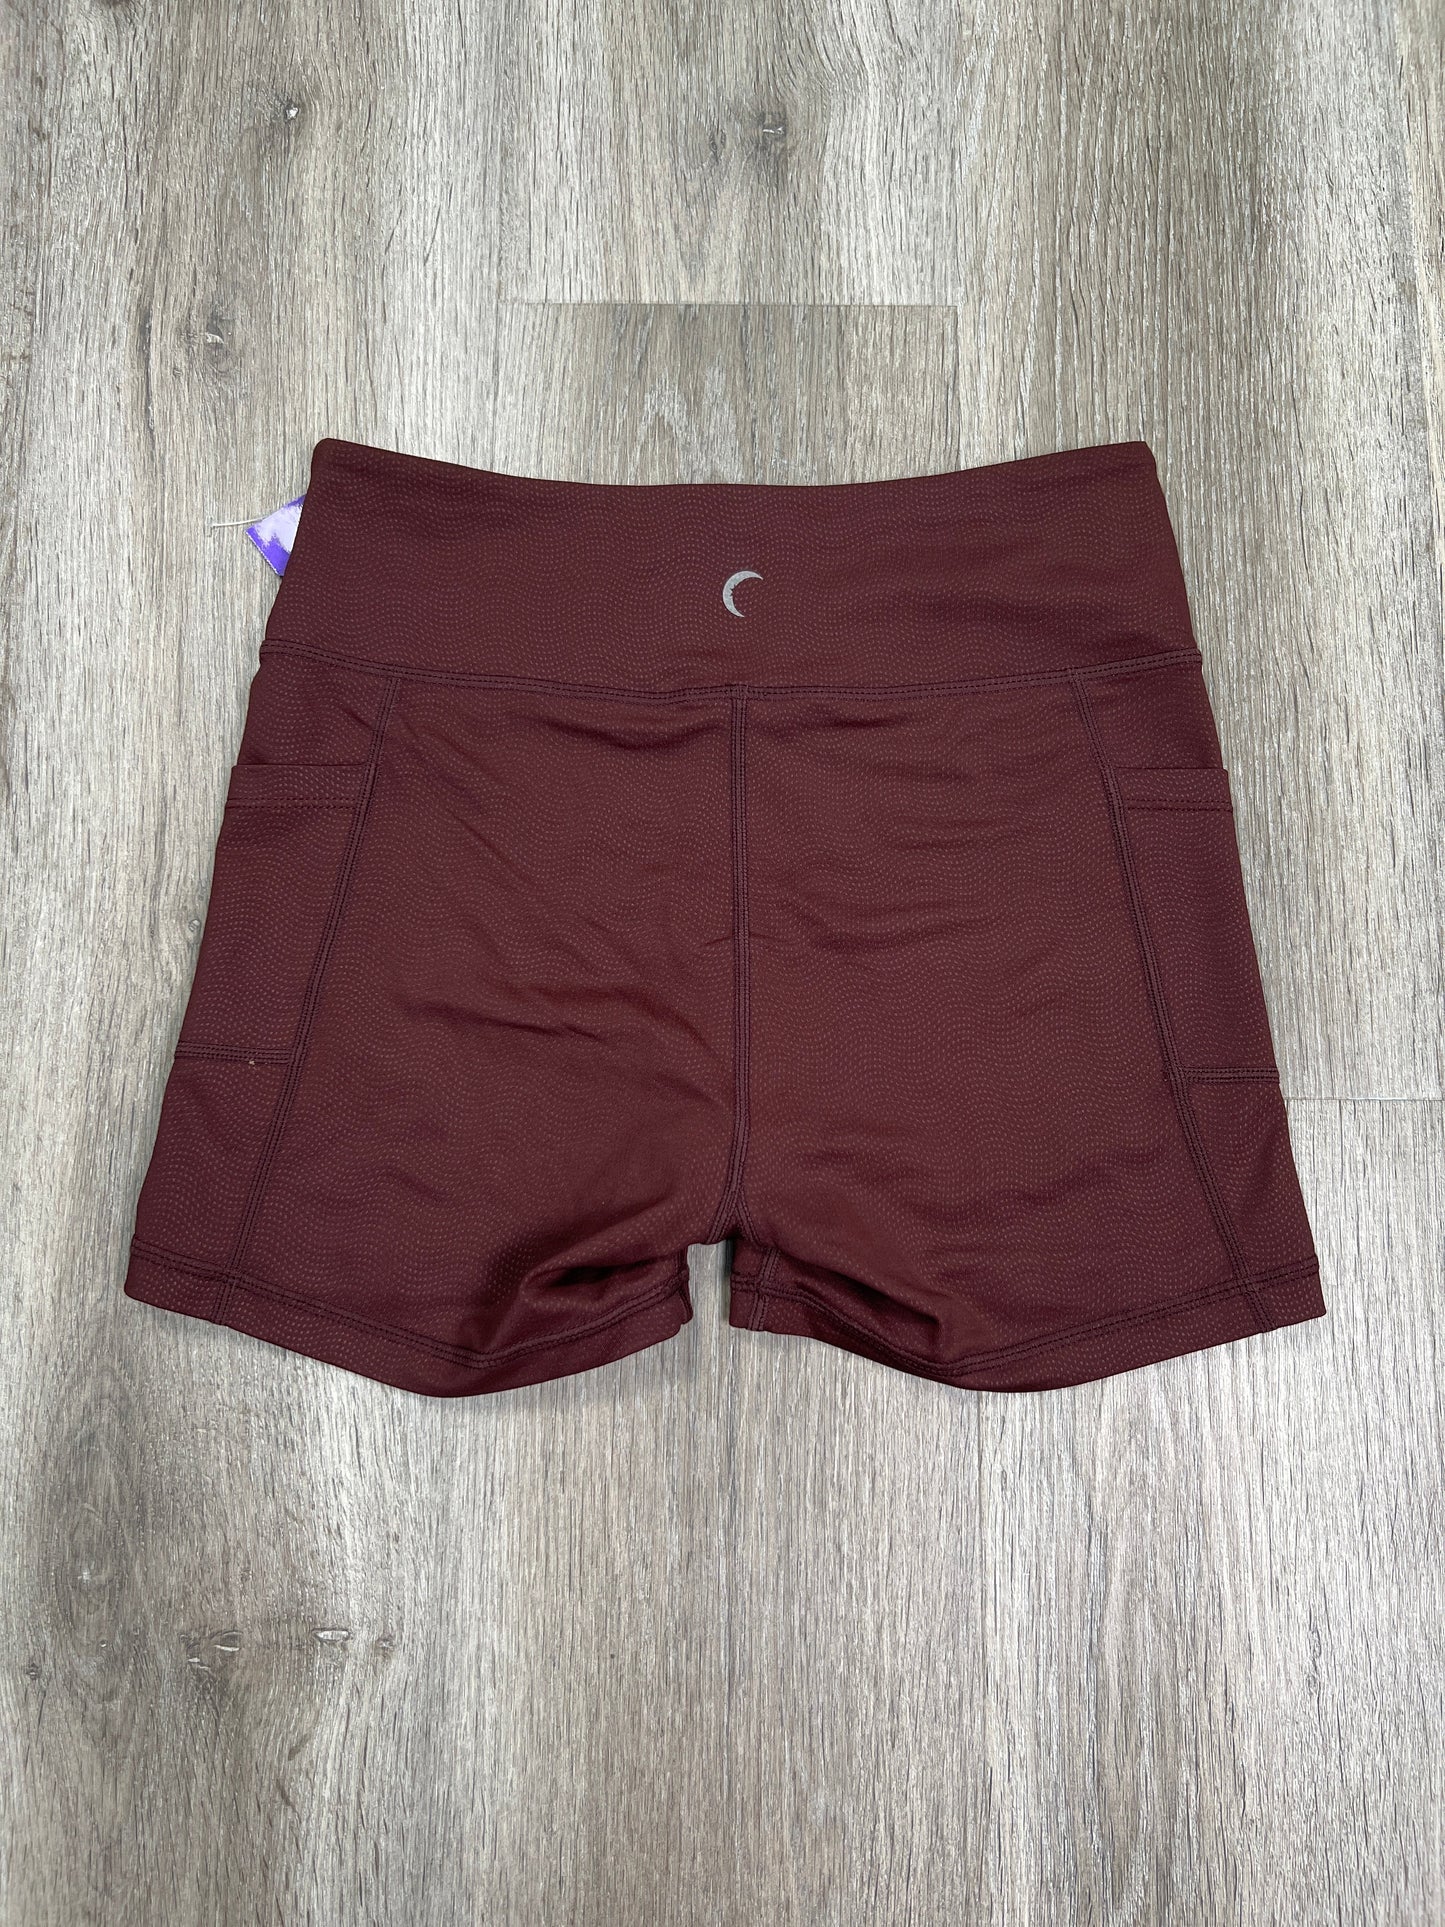 Athletic Shorts By Zyia  Size: S